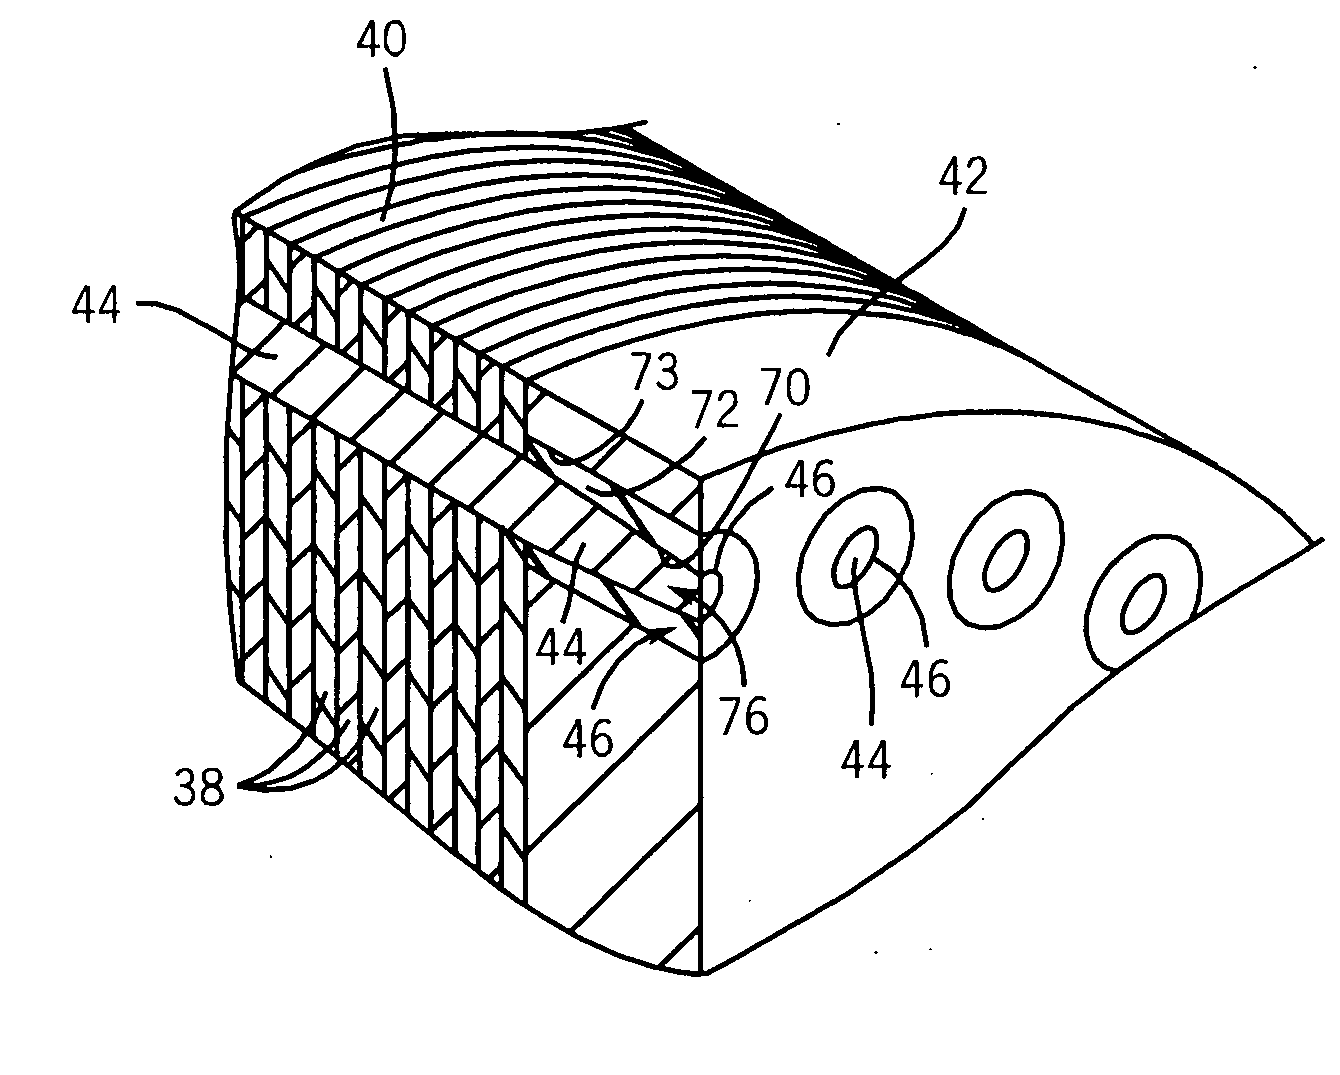 Fabricated rotor assembly fixture and method